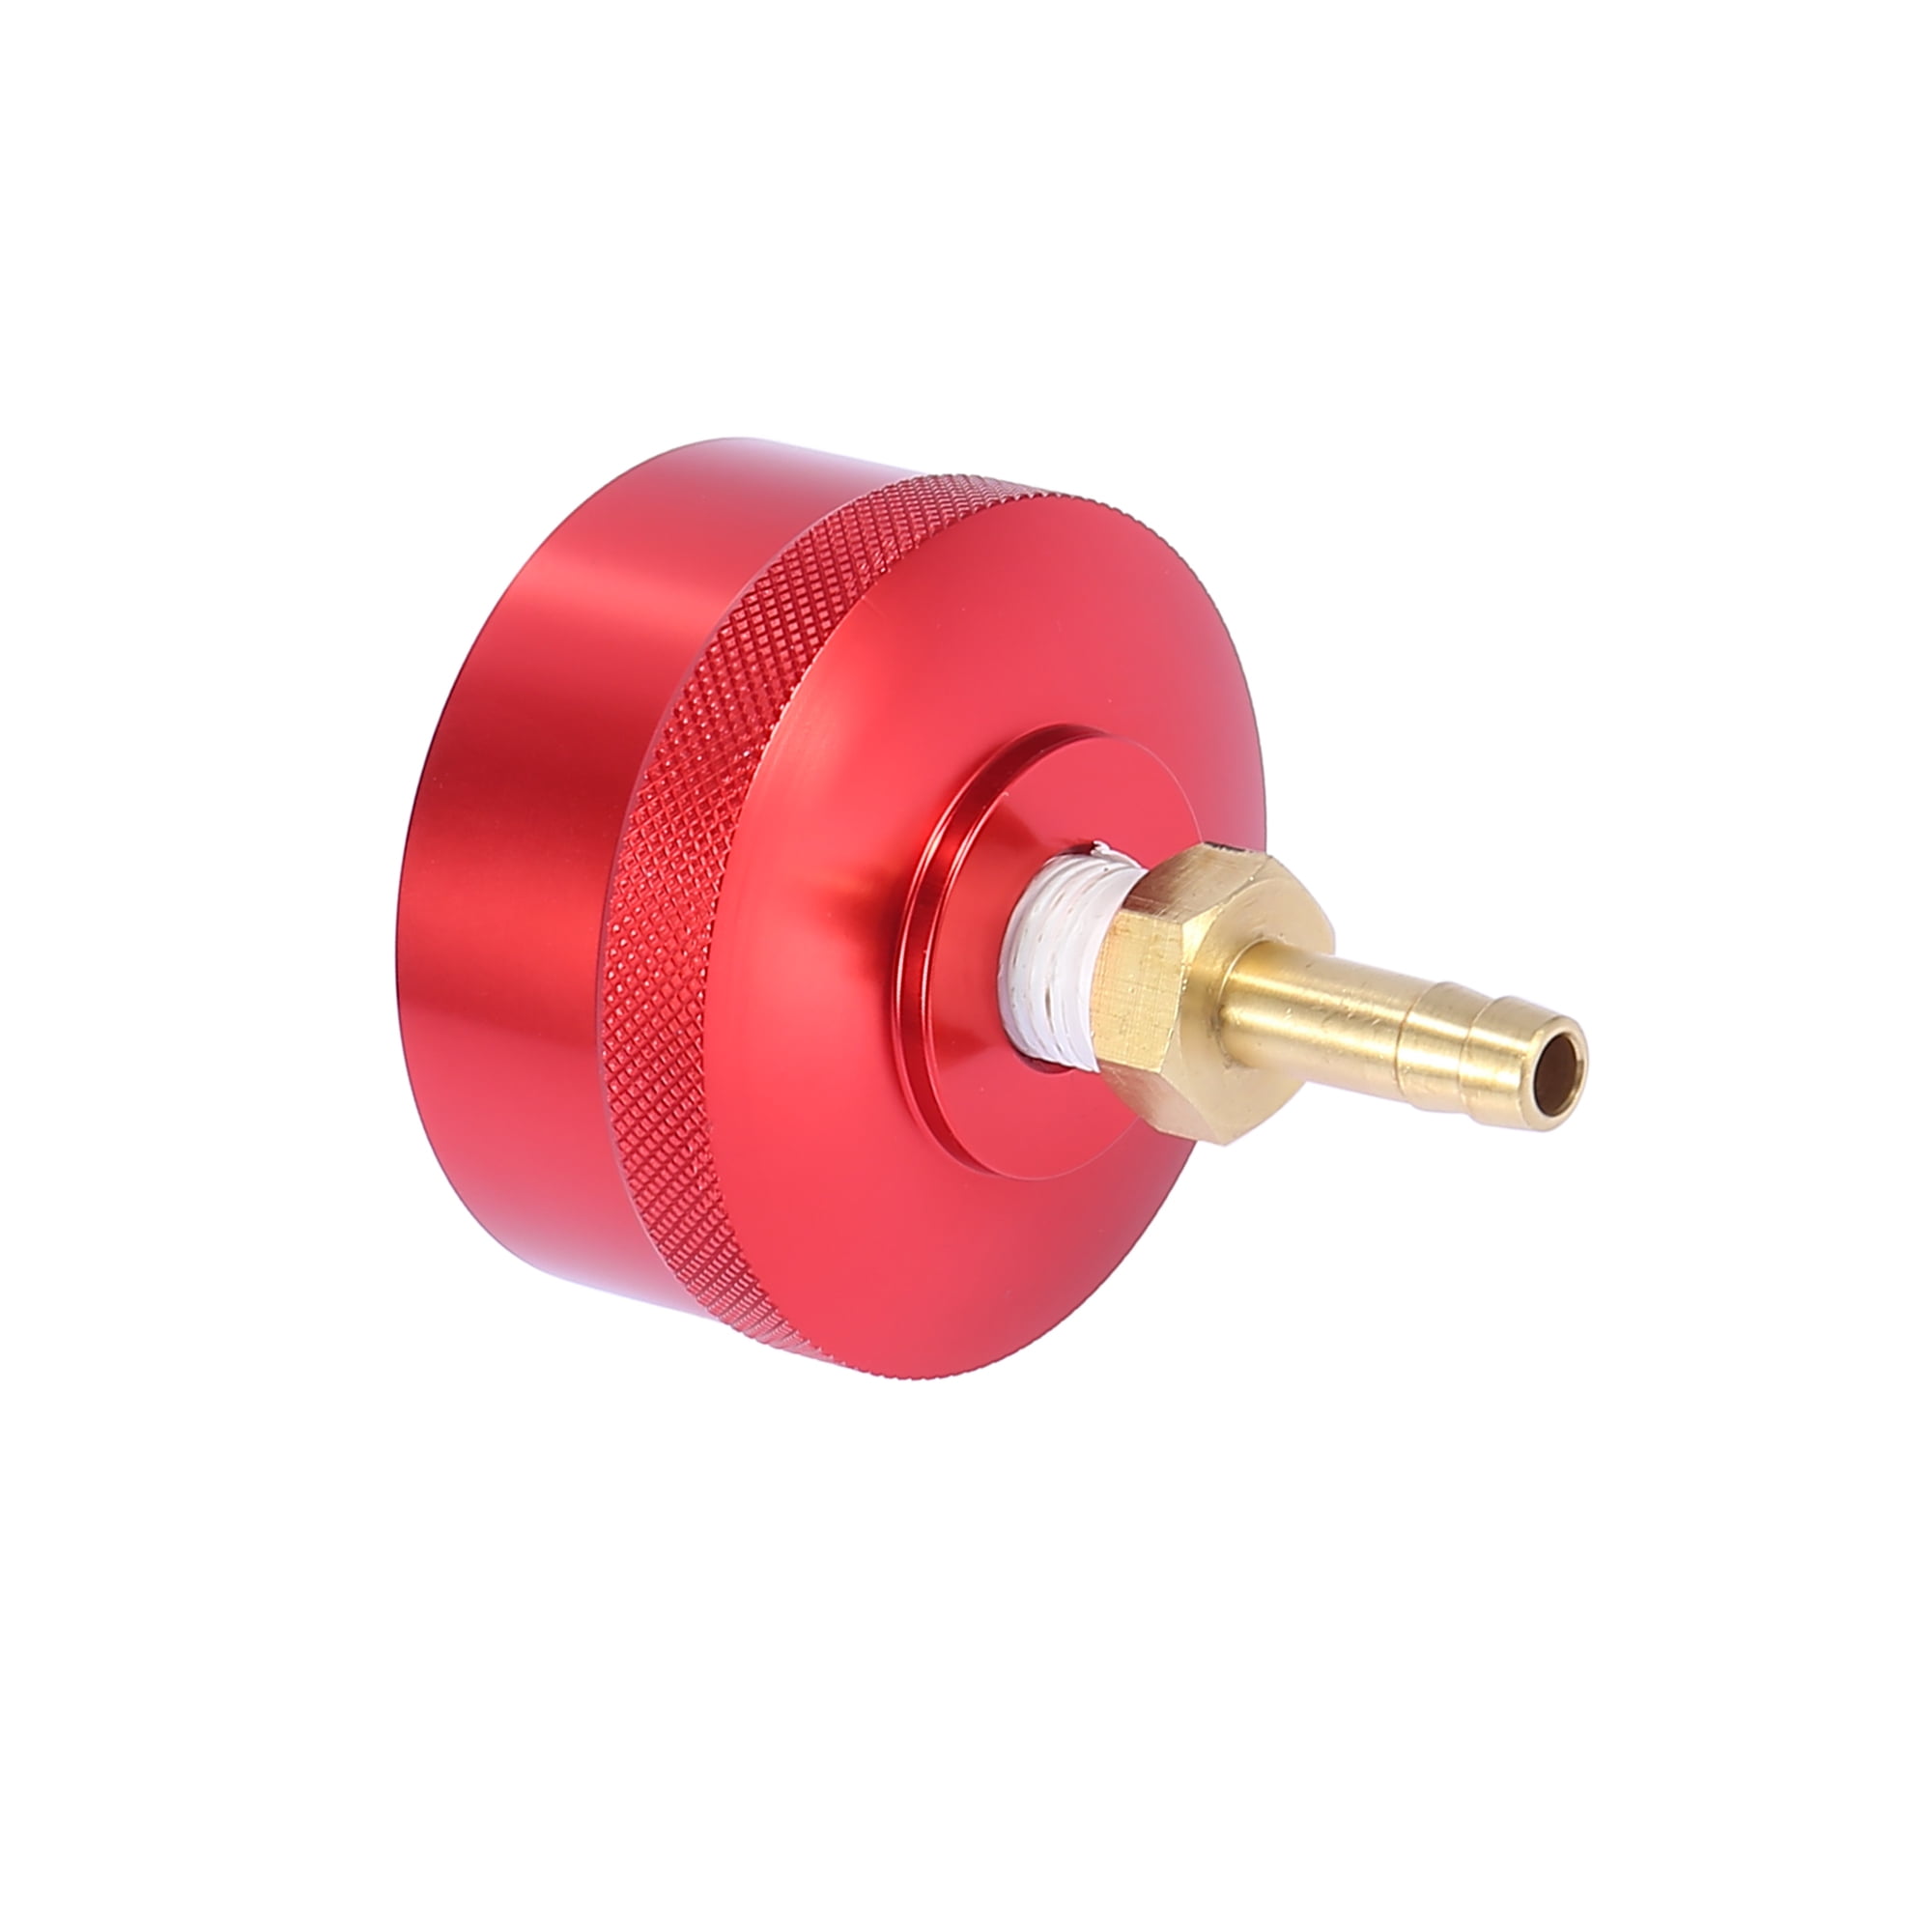 Details about   Red Aluminum Extended Run Gas Cap with Brass Hose Fitting for Honda Generator 